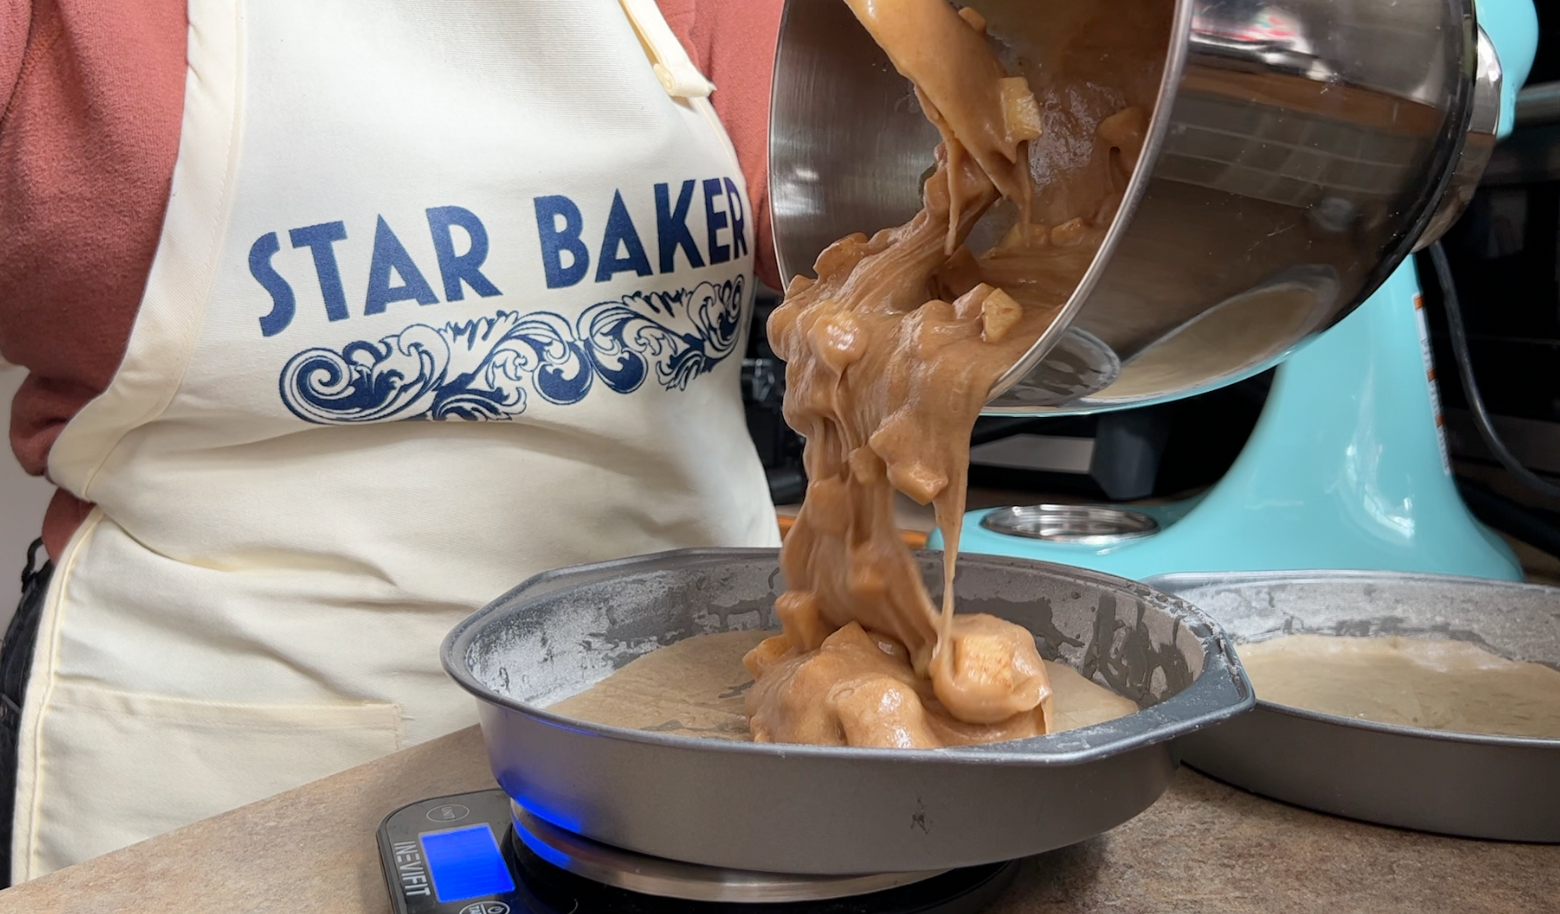 Pouring batter from a bowl into a cake tin.